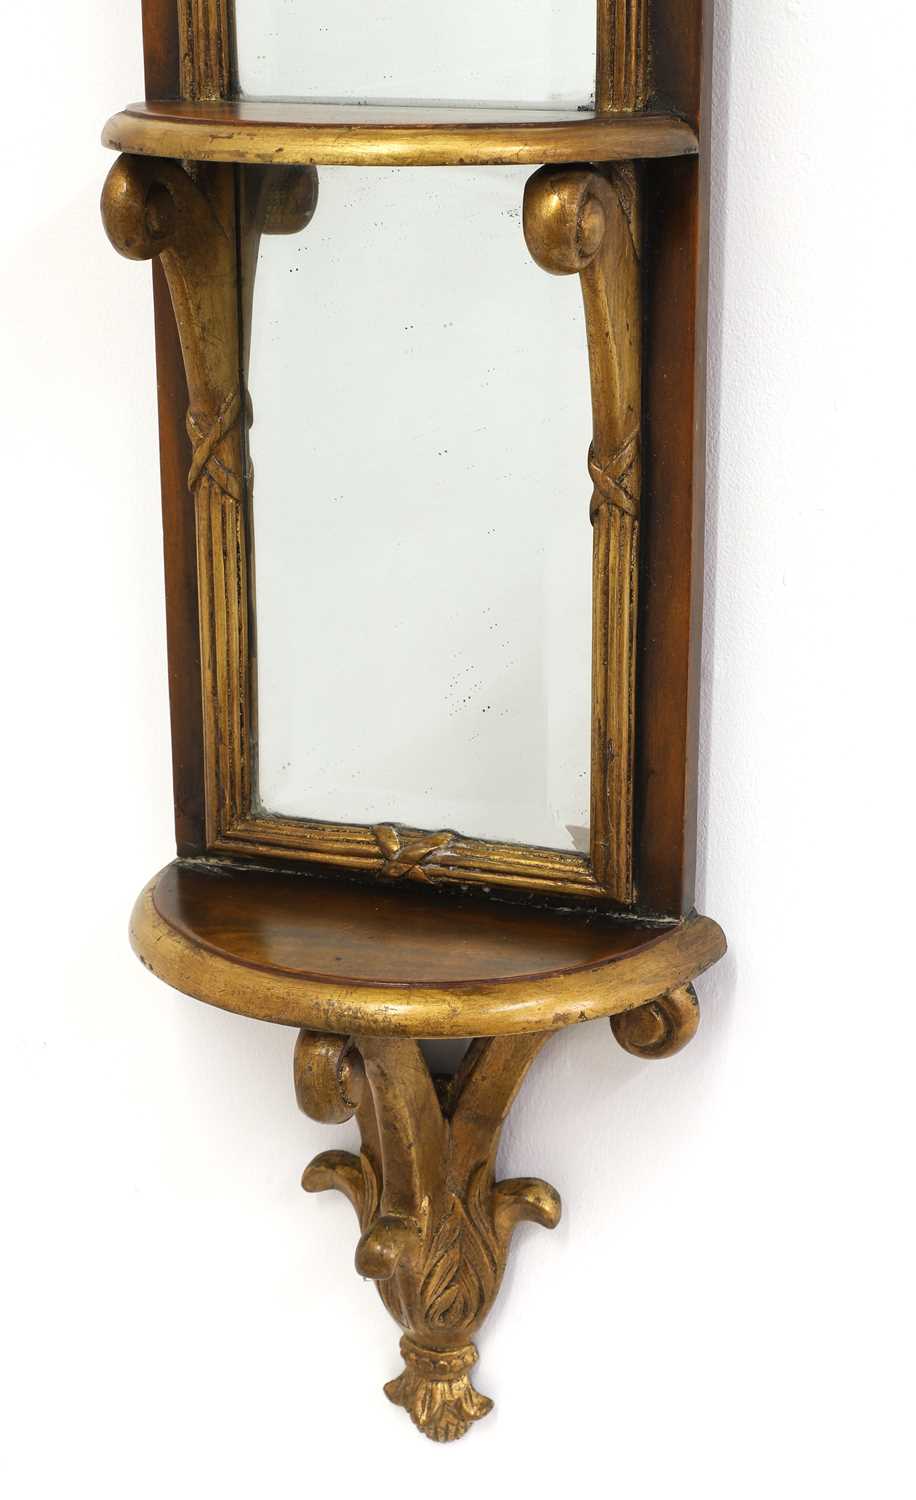 A Regency style hall mirror - Image 3 of 3